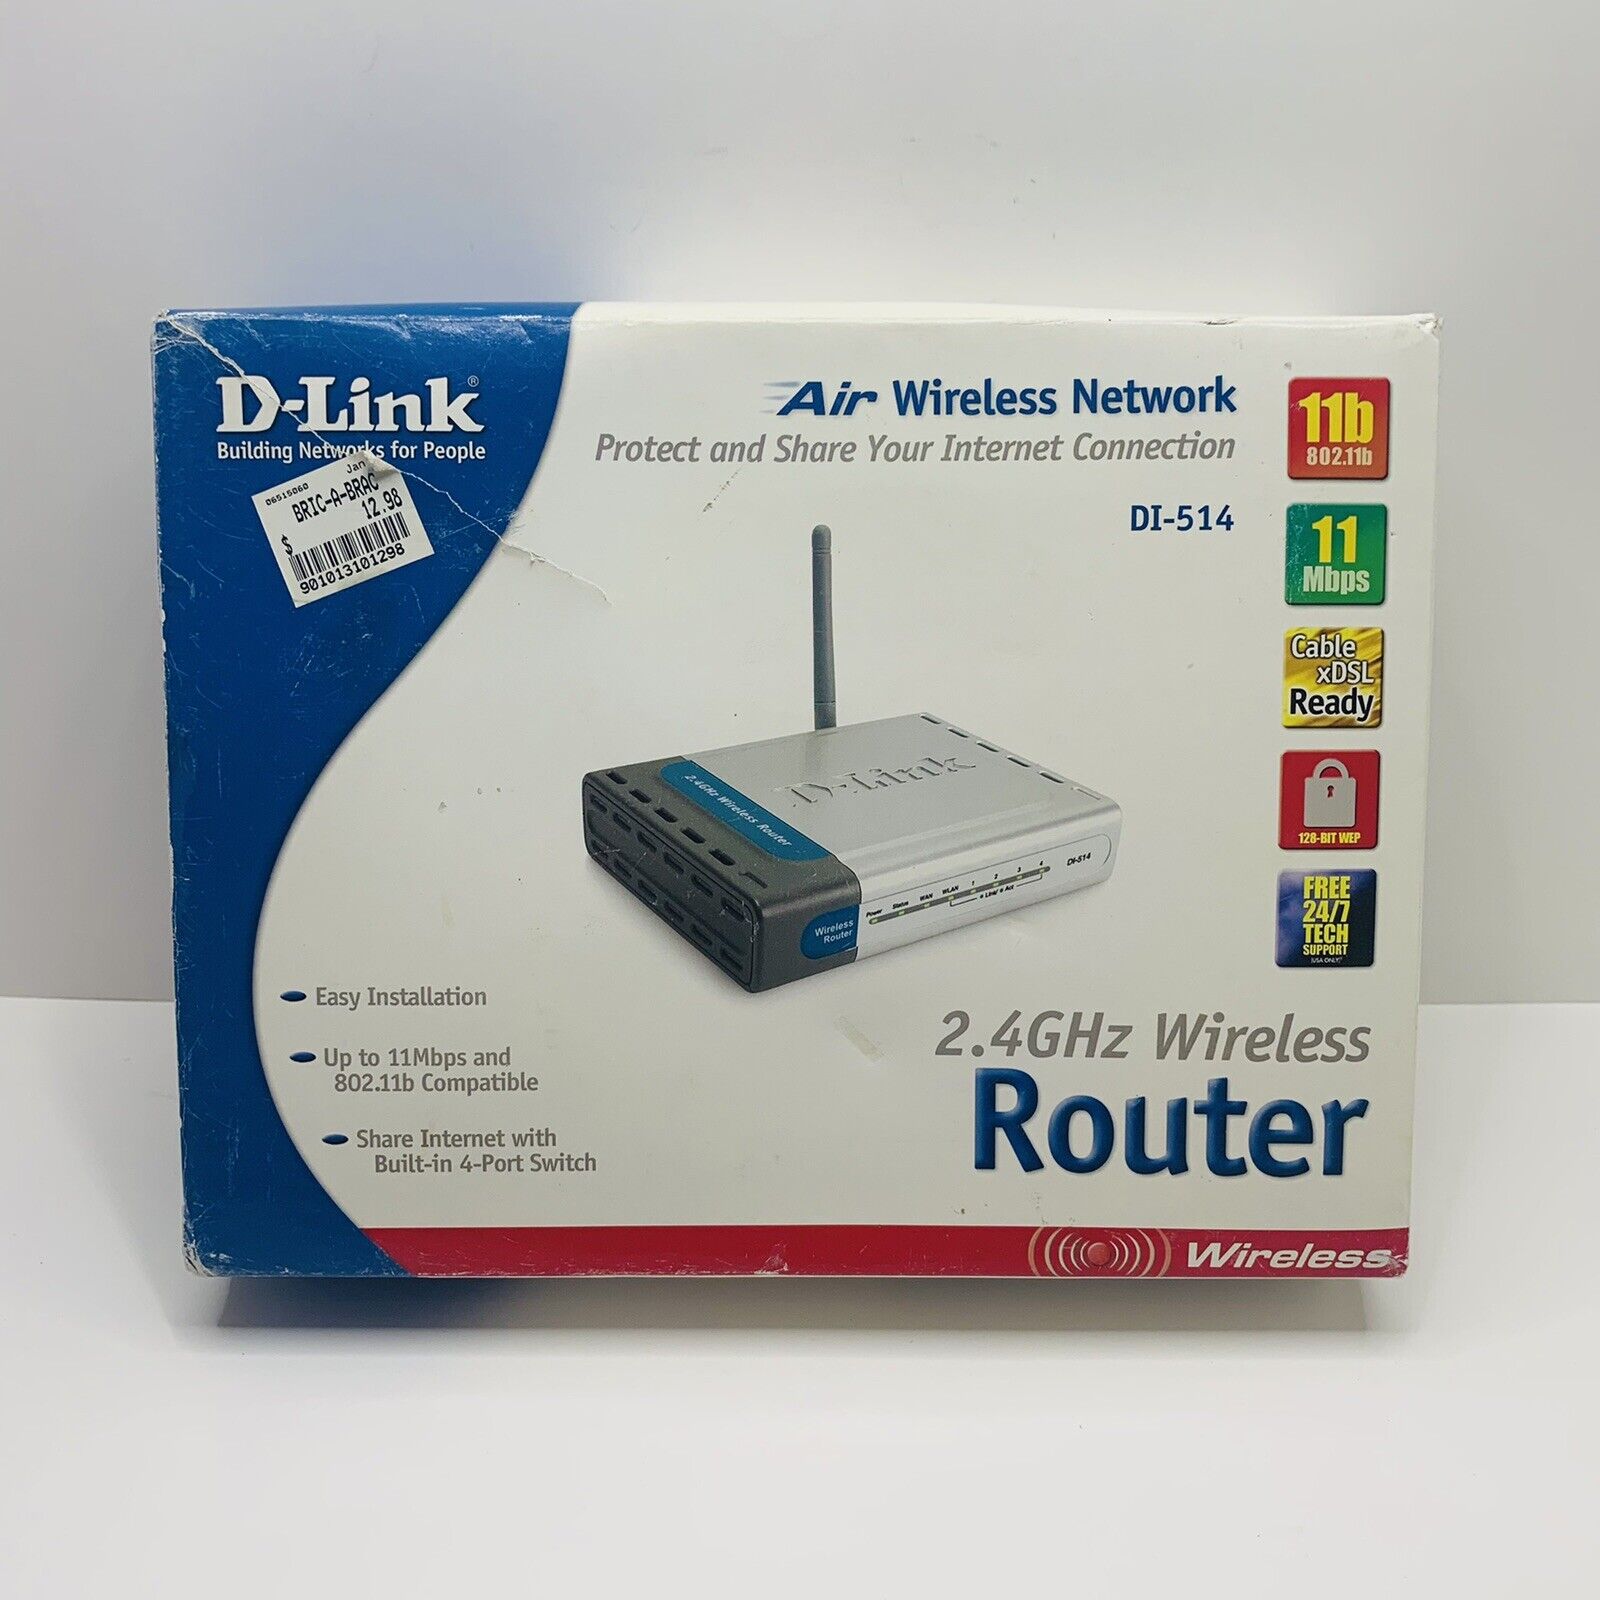 D-Link DI-514 Air Wireless Network Router 802.11b WiFi 11Mbps 4 Port